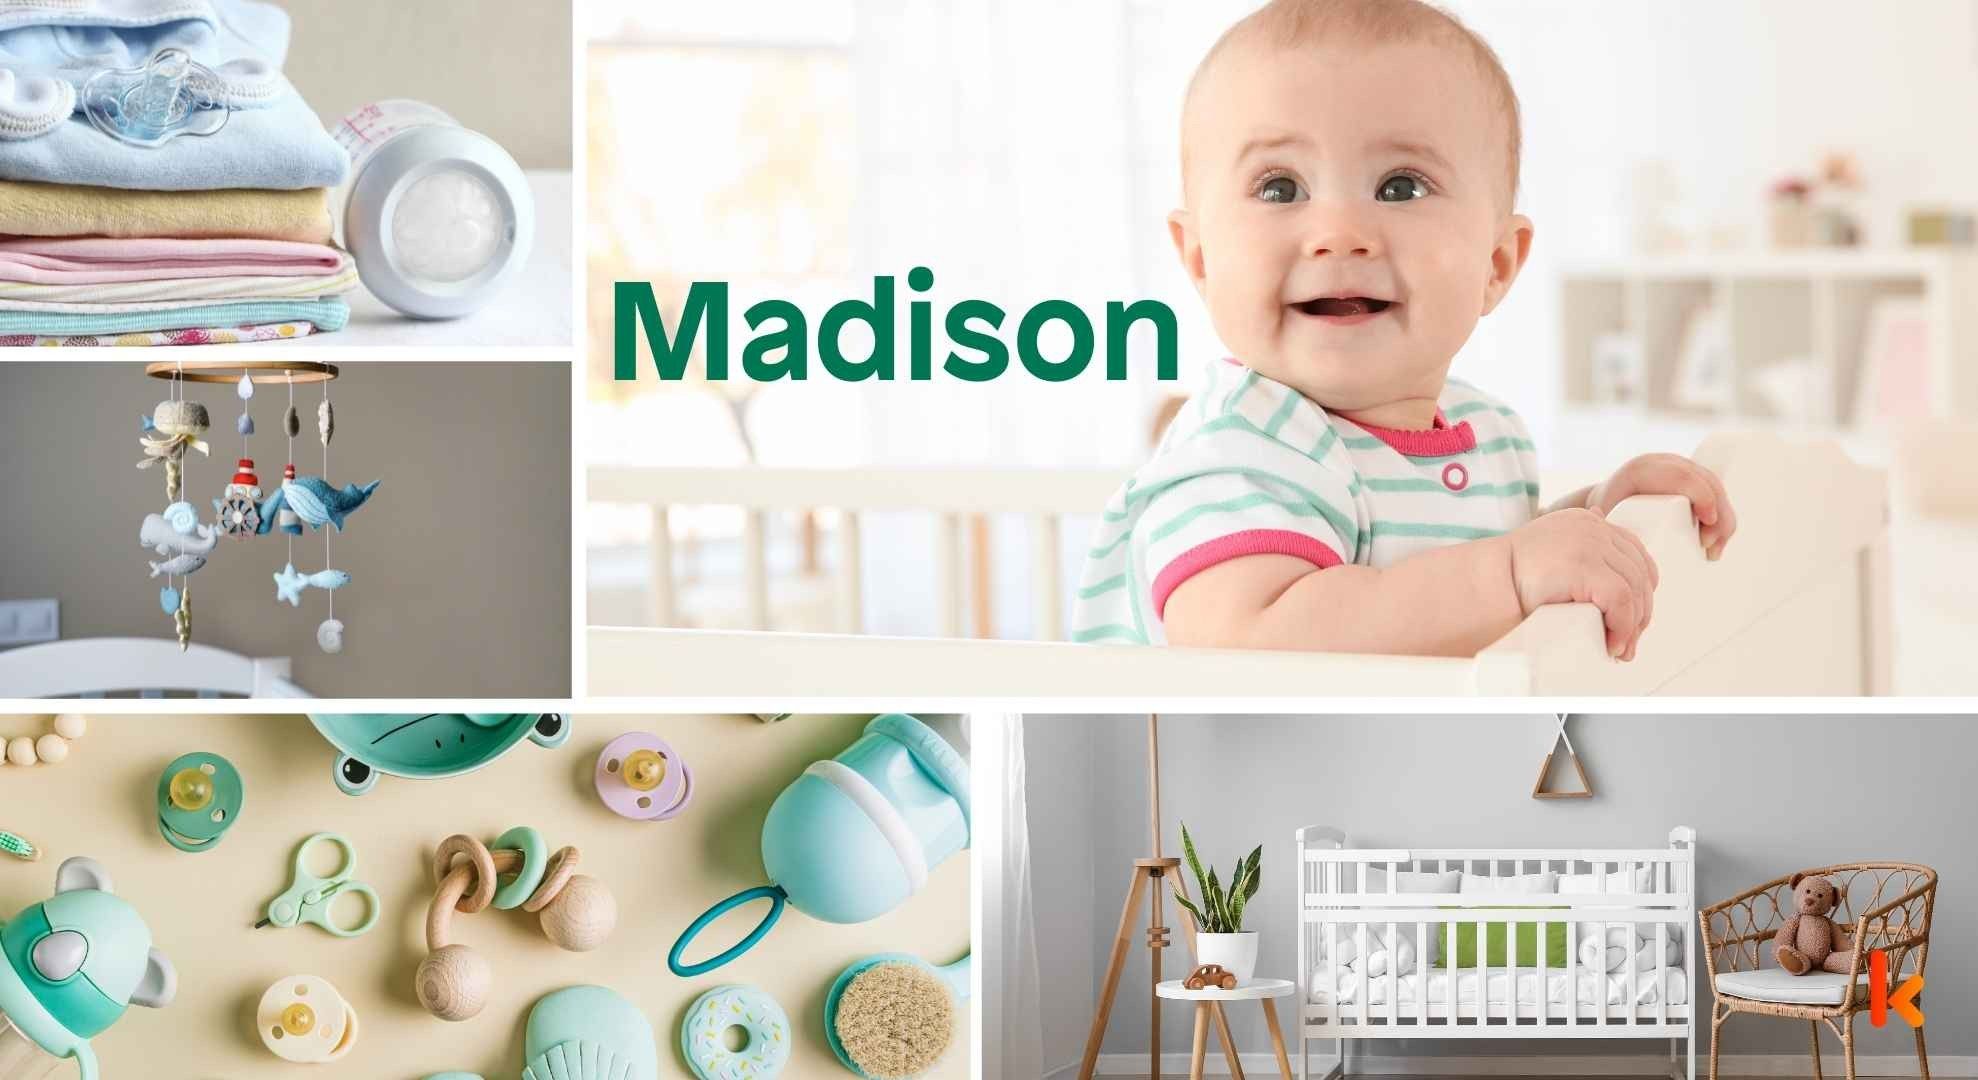 Meaning of the name Madison